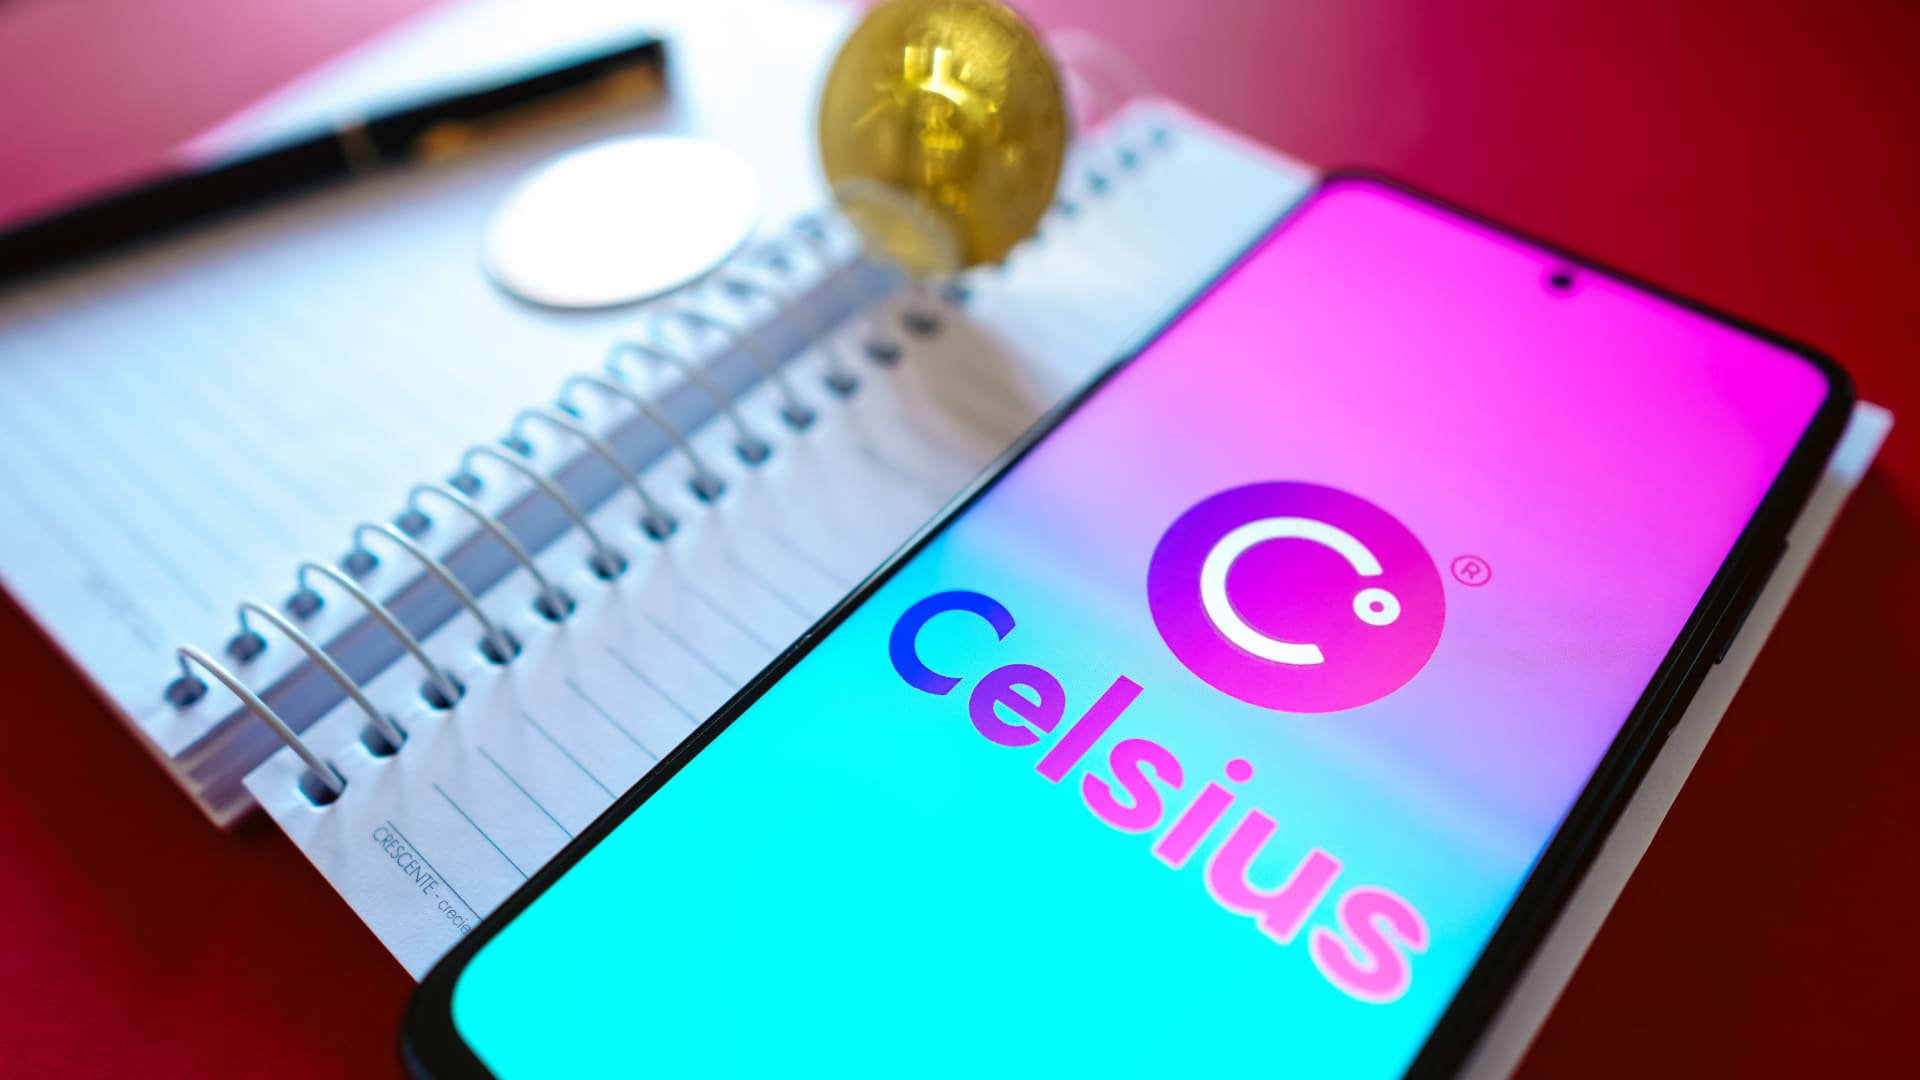 Celsius strategy chief S. Daniel Leon is leaving company, sources say